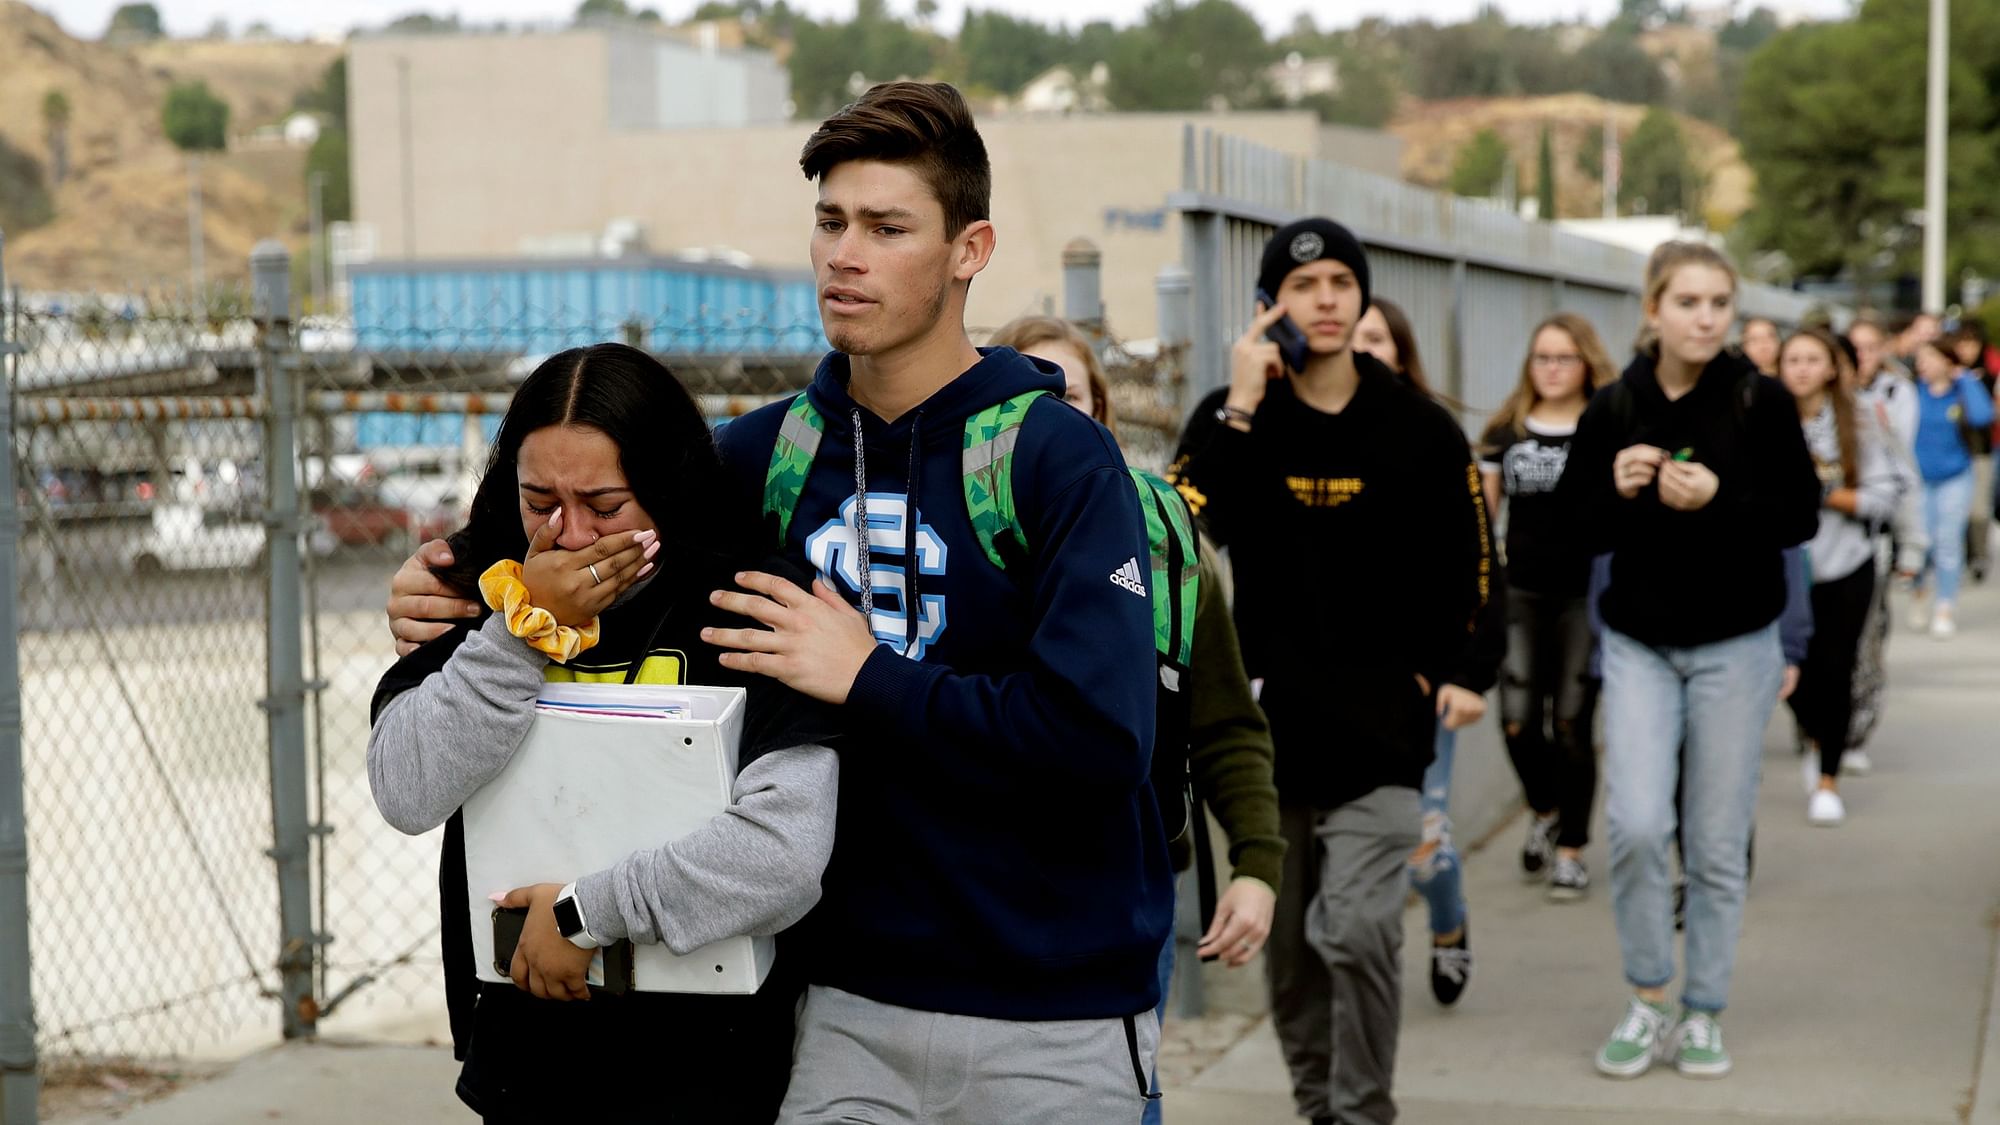 Students were escorted out of Saugus High School after reports of a shooting.&nbsp;